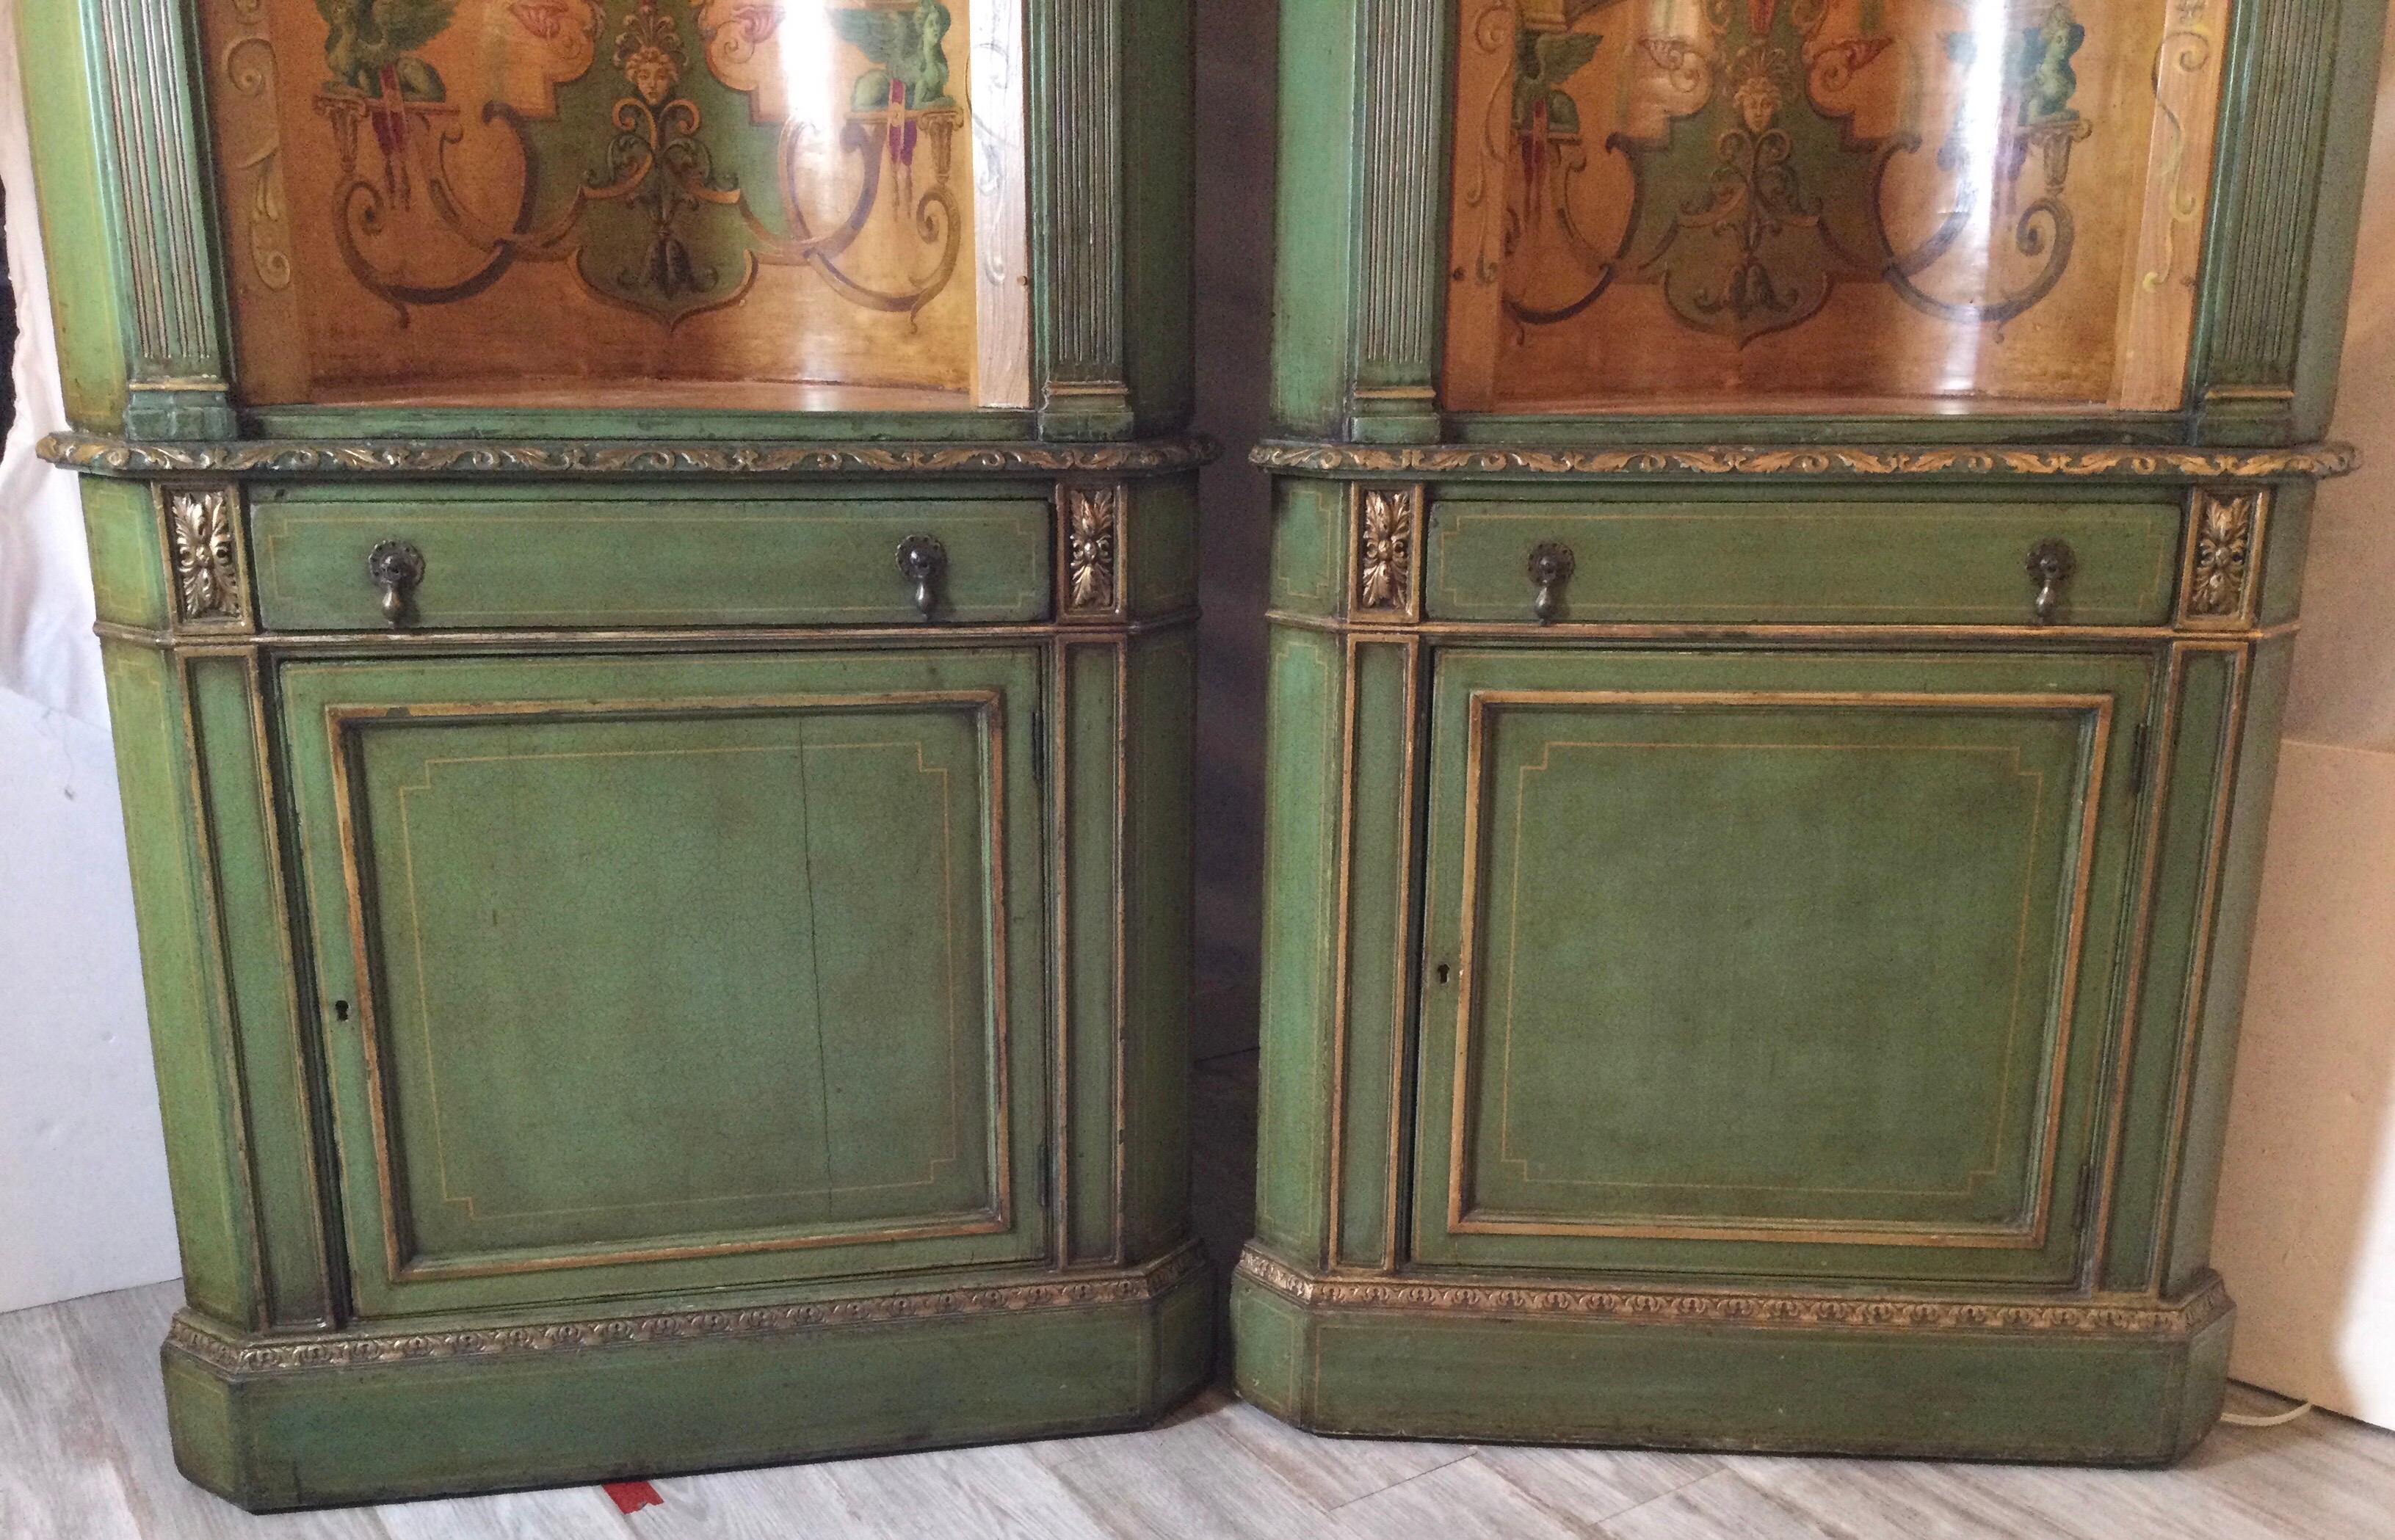 Neoclassical Revival Wonderful Pair of Neo Classical Corner Cabinets w/ Hand Painted Curved Interiors